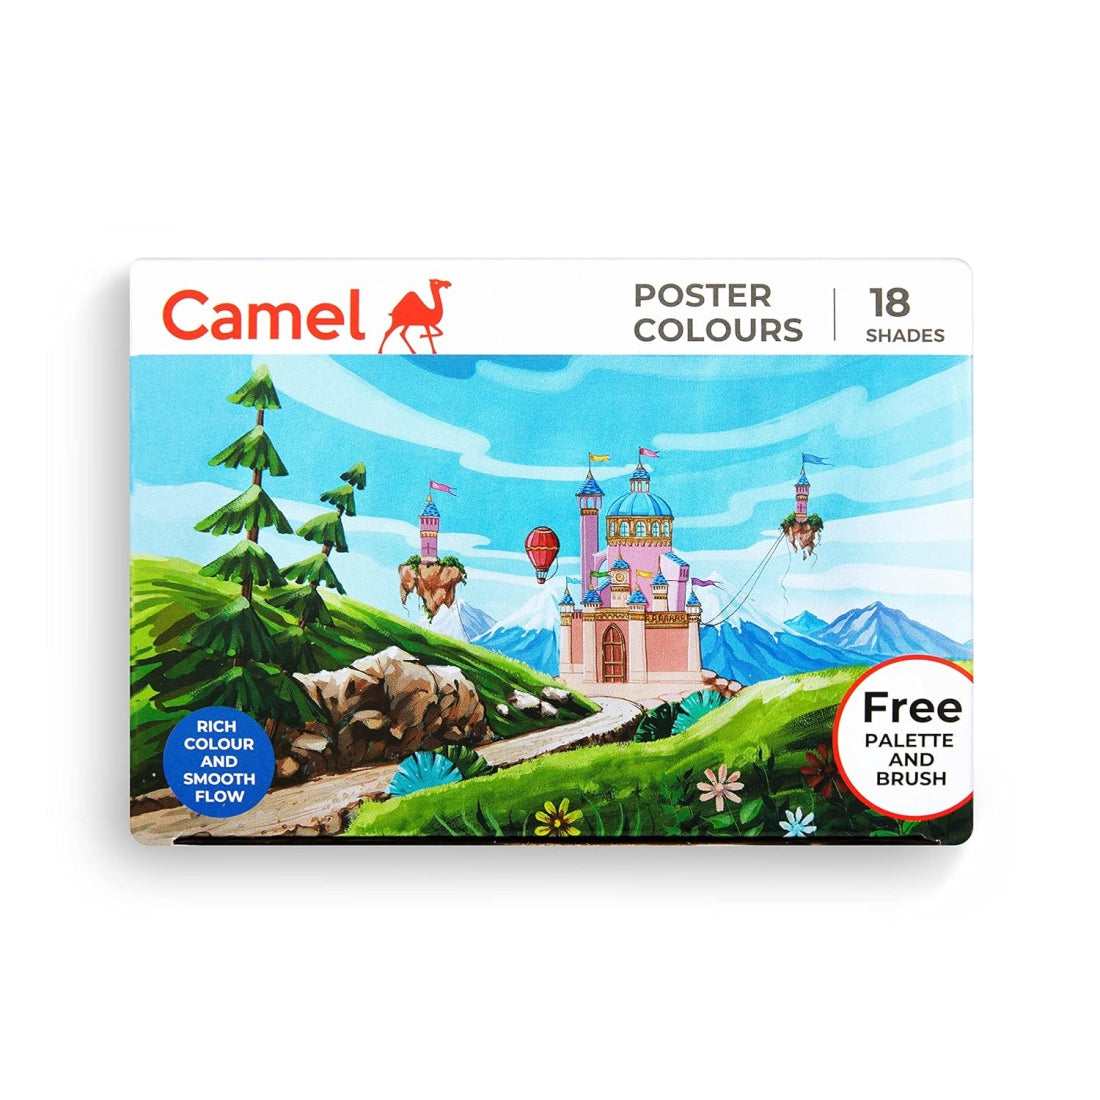 Camel Poster Colours